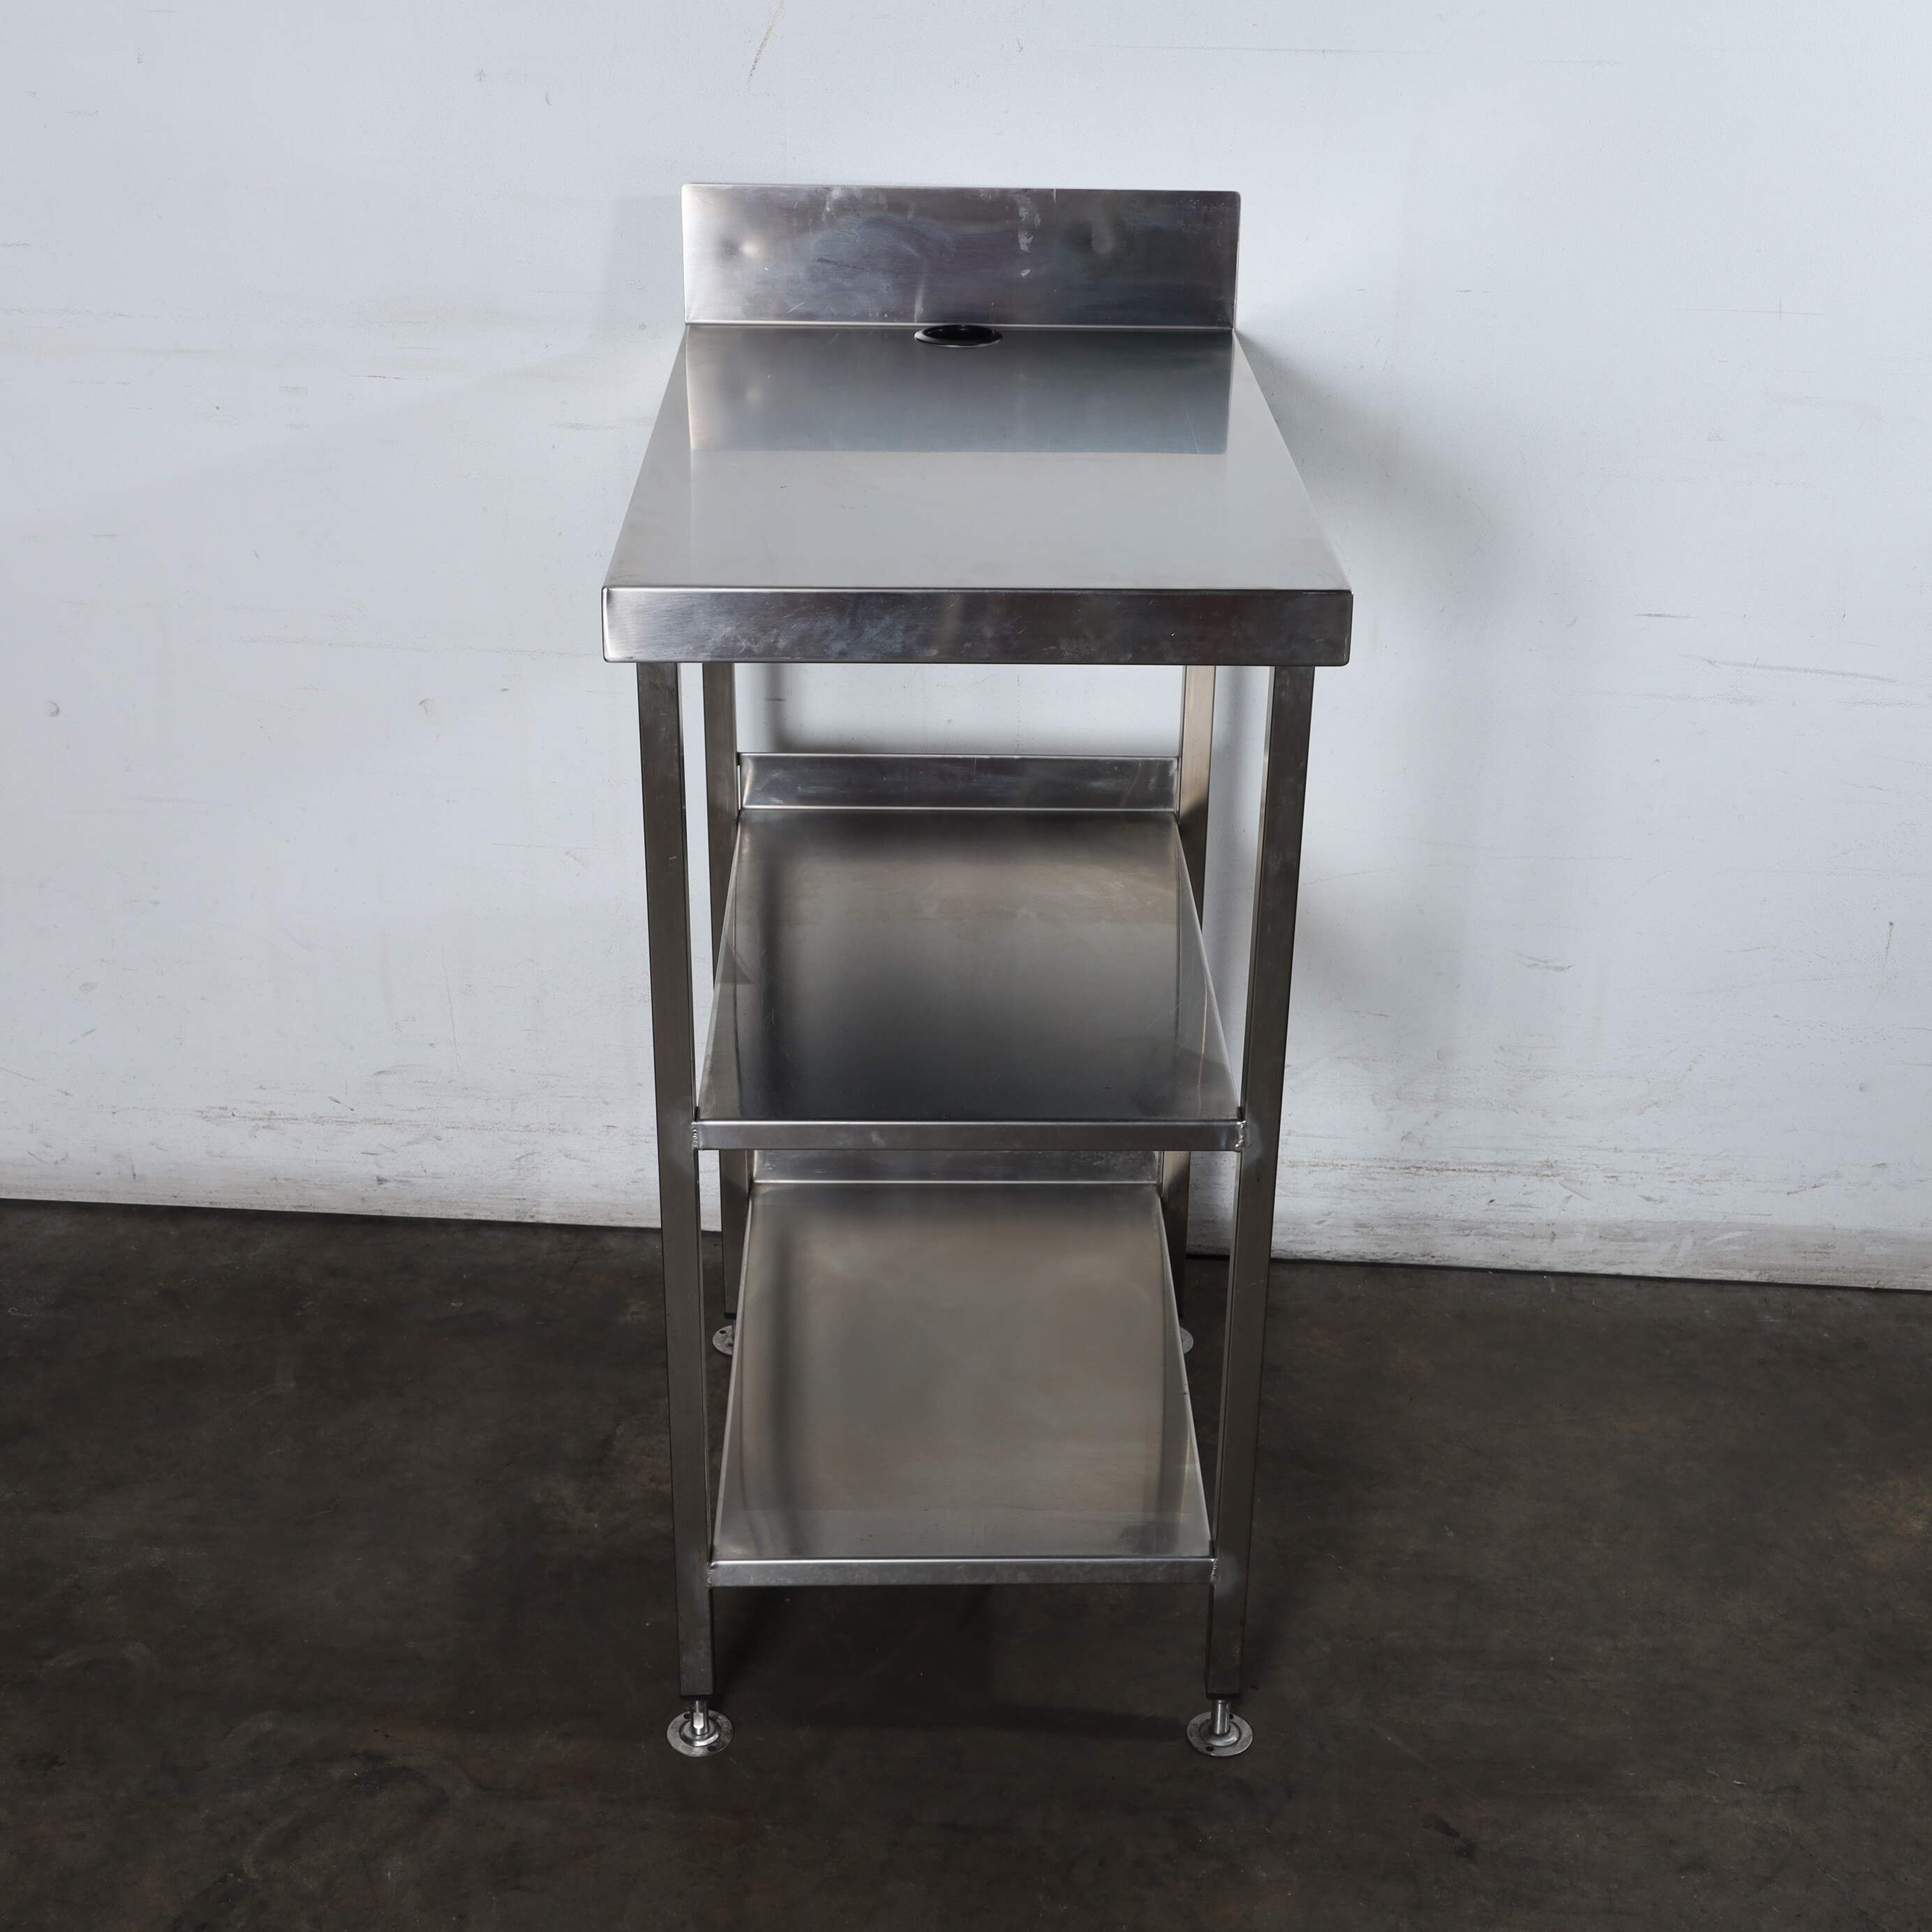 Thumbnail - Stainless Steel Bench 450mm